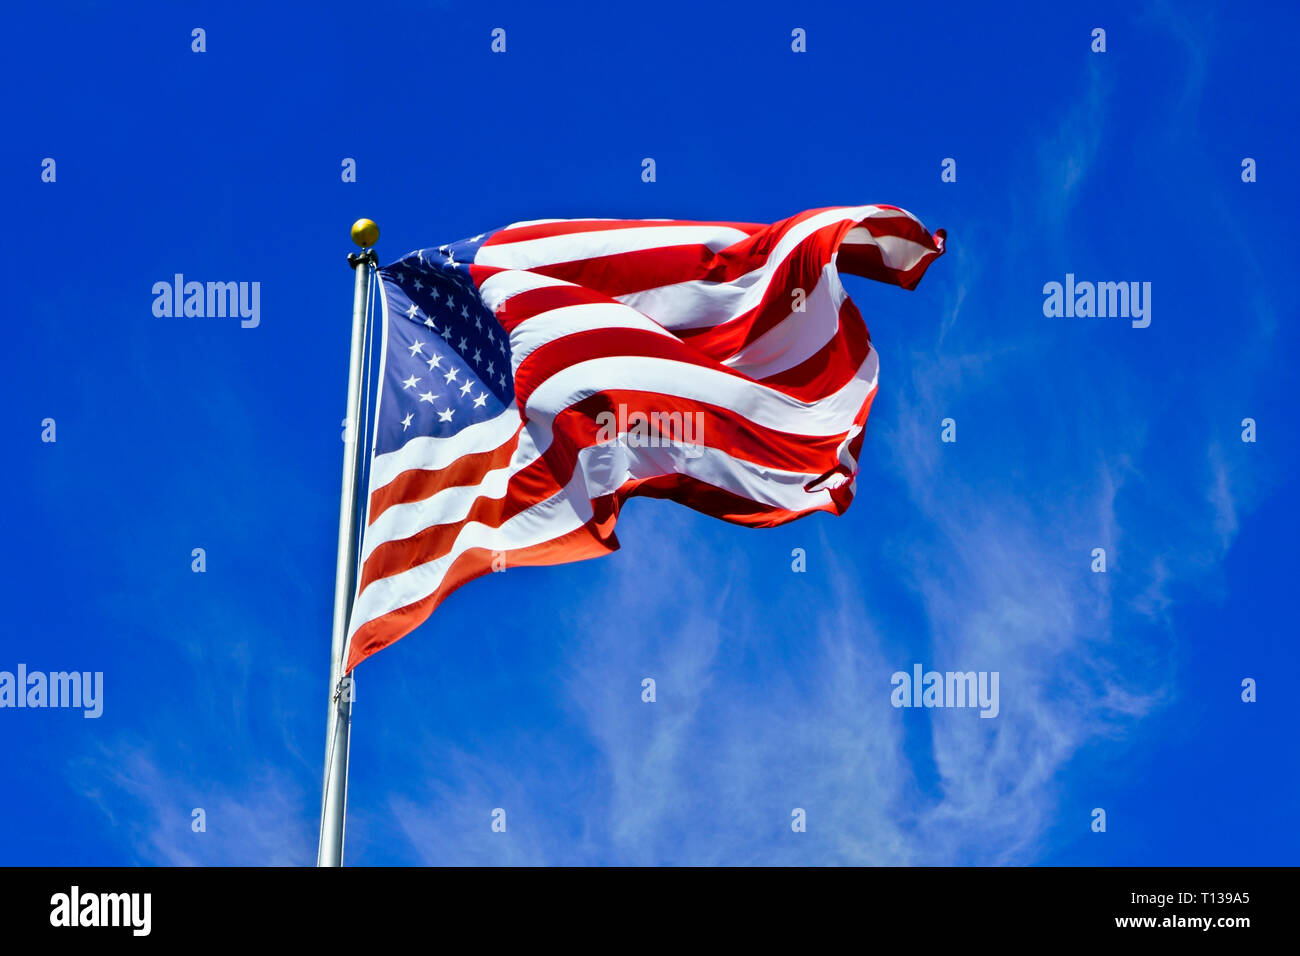 Beautiful US American flag in bold colors. USA flag with stars and stripes against a blue sky background with very decorative clouds passing by. Stock Photo